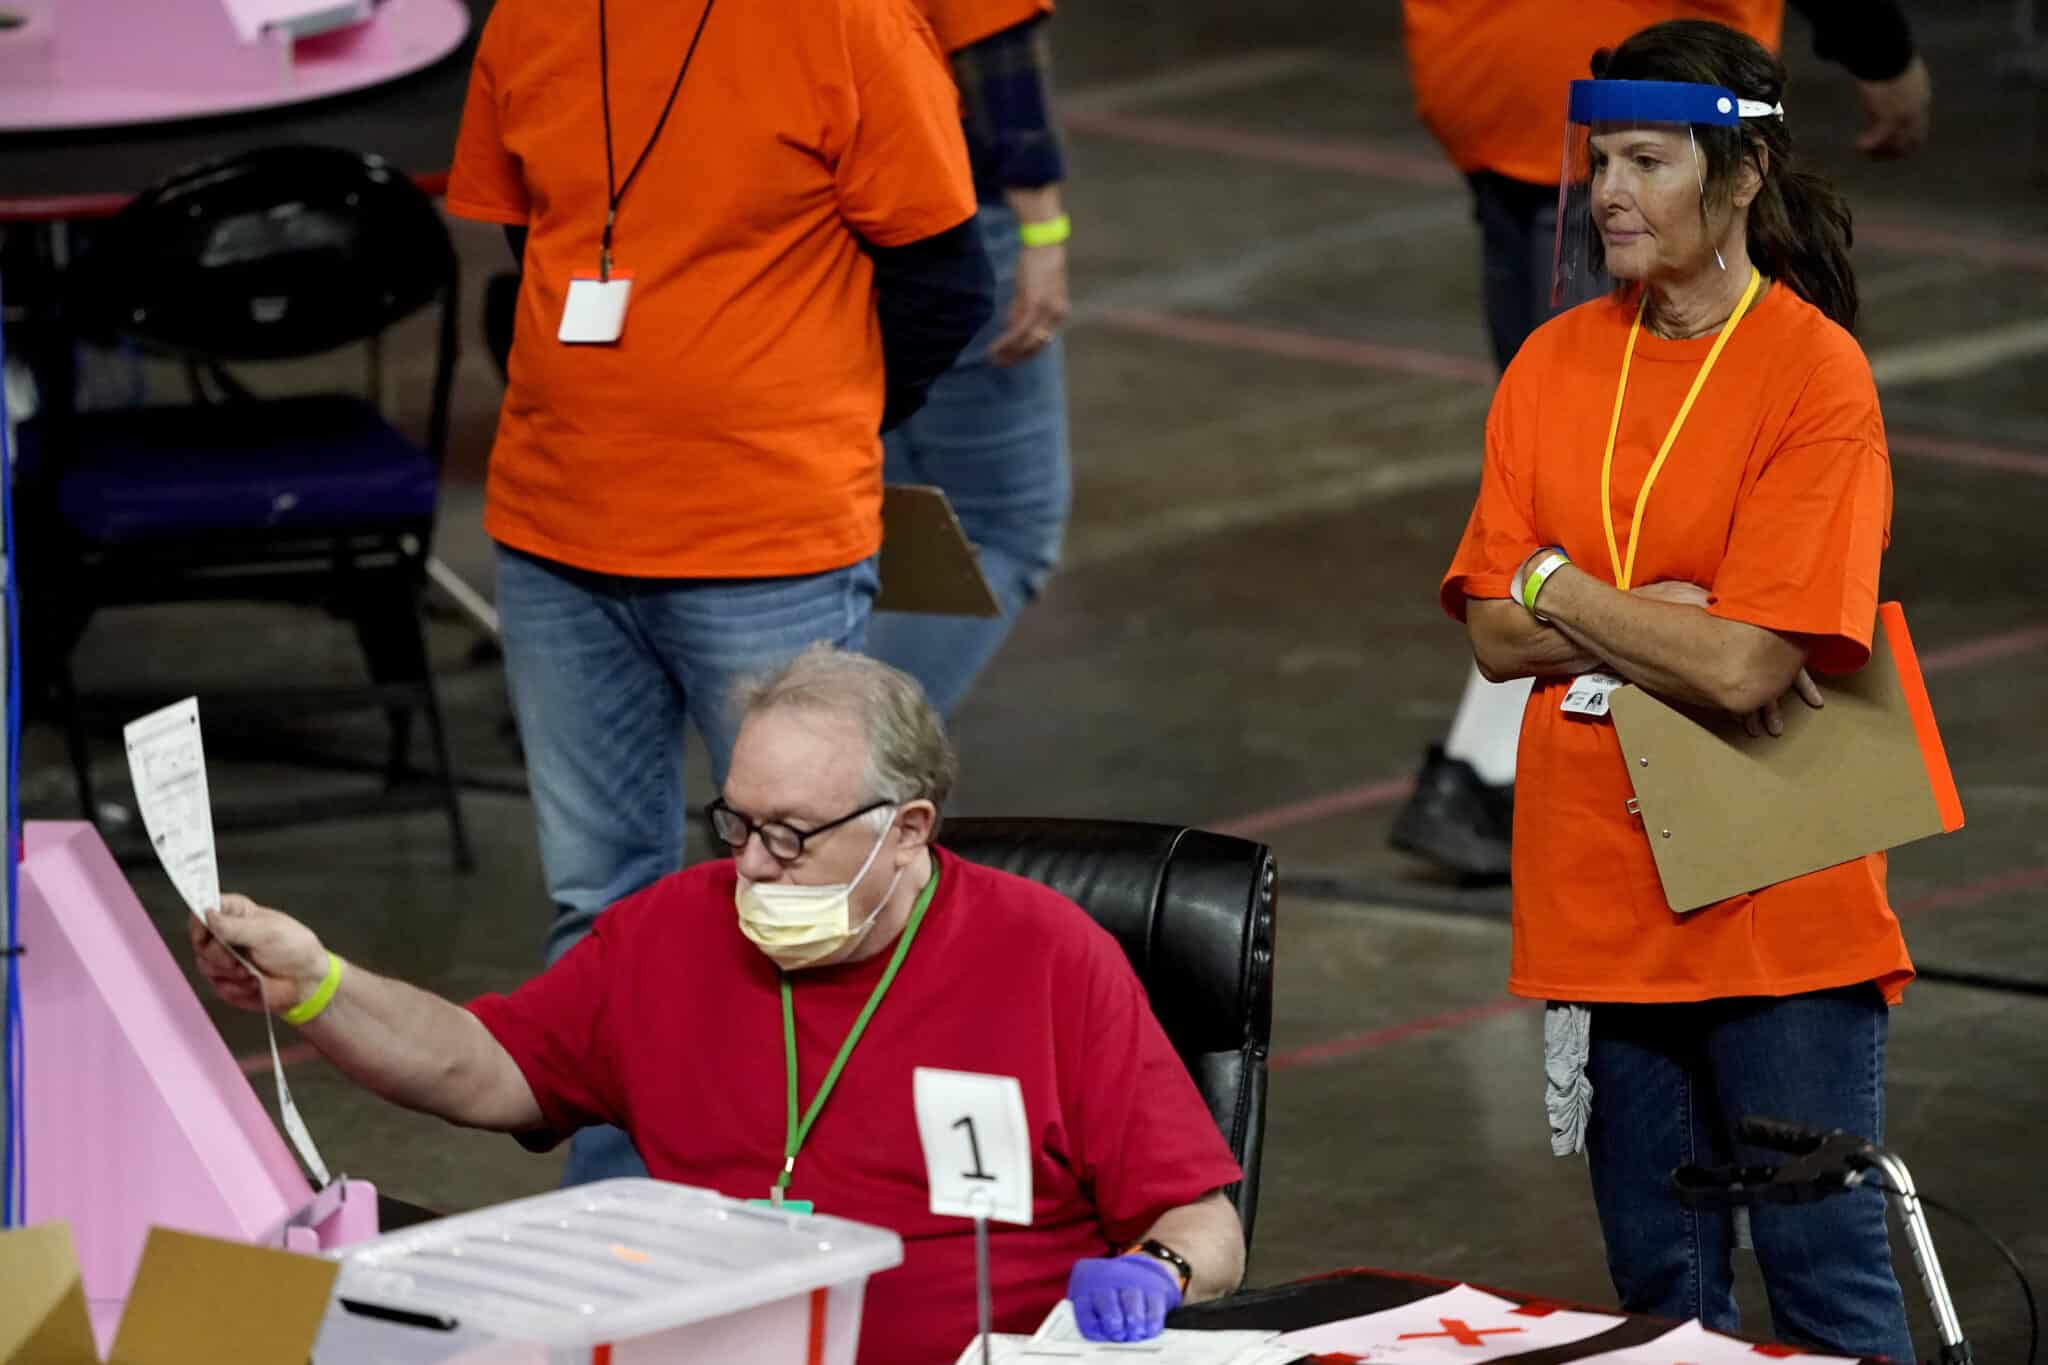 FILE - Maricopa County ballots cast in the 2020 general election are examined and recounted by contractors working for Florida-based company, Cyber Ninjas at Veterans Memorial Coliseum in Phoenix, May 6, 2021. A judge has blocked a rural Arizona county's plan to hand-count all the ballots in the Nov. 8, 2022, election. The full hand-count was ordered by Republican officials in Cochise County who have made unfounded claims that vote-counting machines are untrustworthy. The ruling on Monday, Nov. 7, from Pima County Superior Court Judge Casey F. McGinley came after a full-day hearing late the week before, in which opponents spoke out against the proposal. (AP Photo/Matt York, Pool,File)